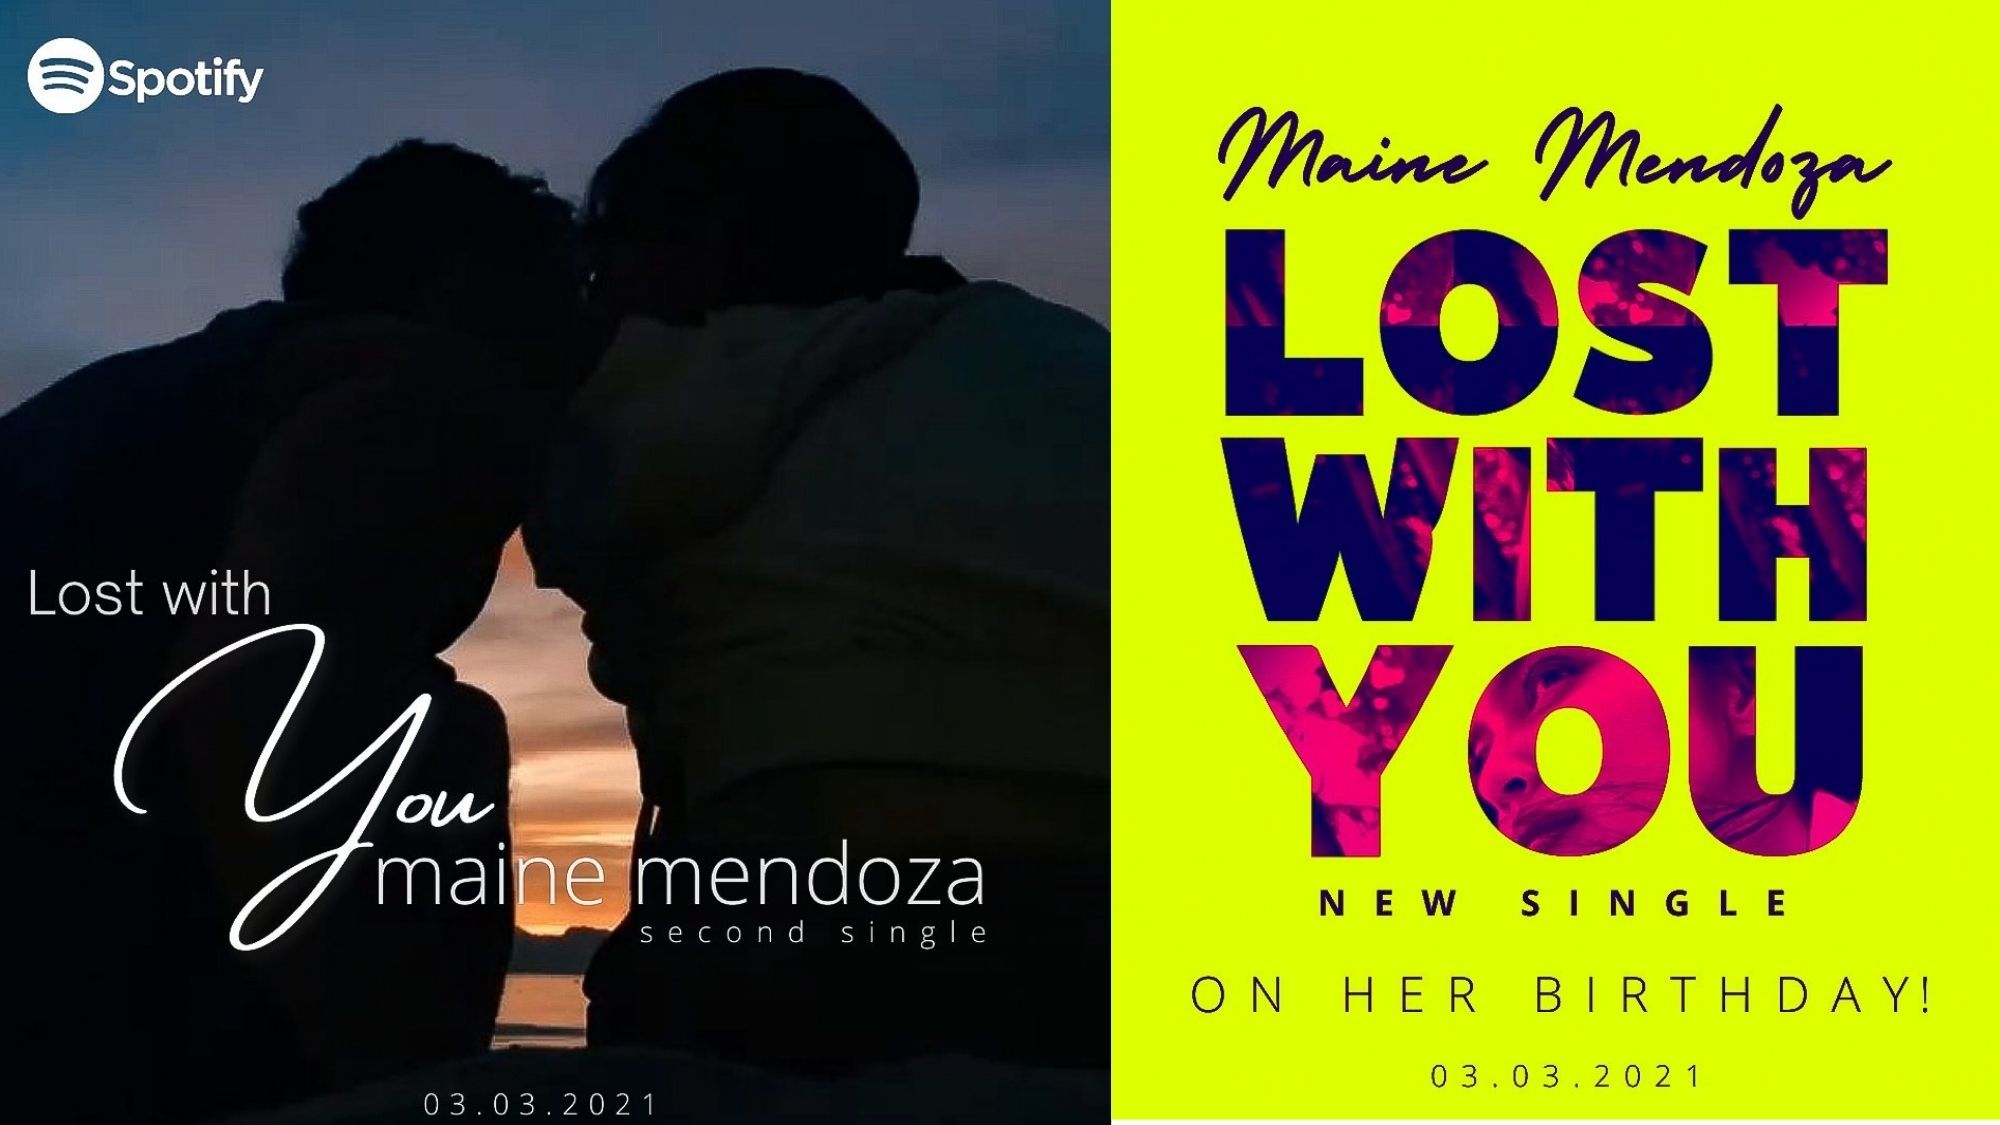 Maine Mendoza new single "Lost Without You"